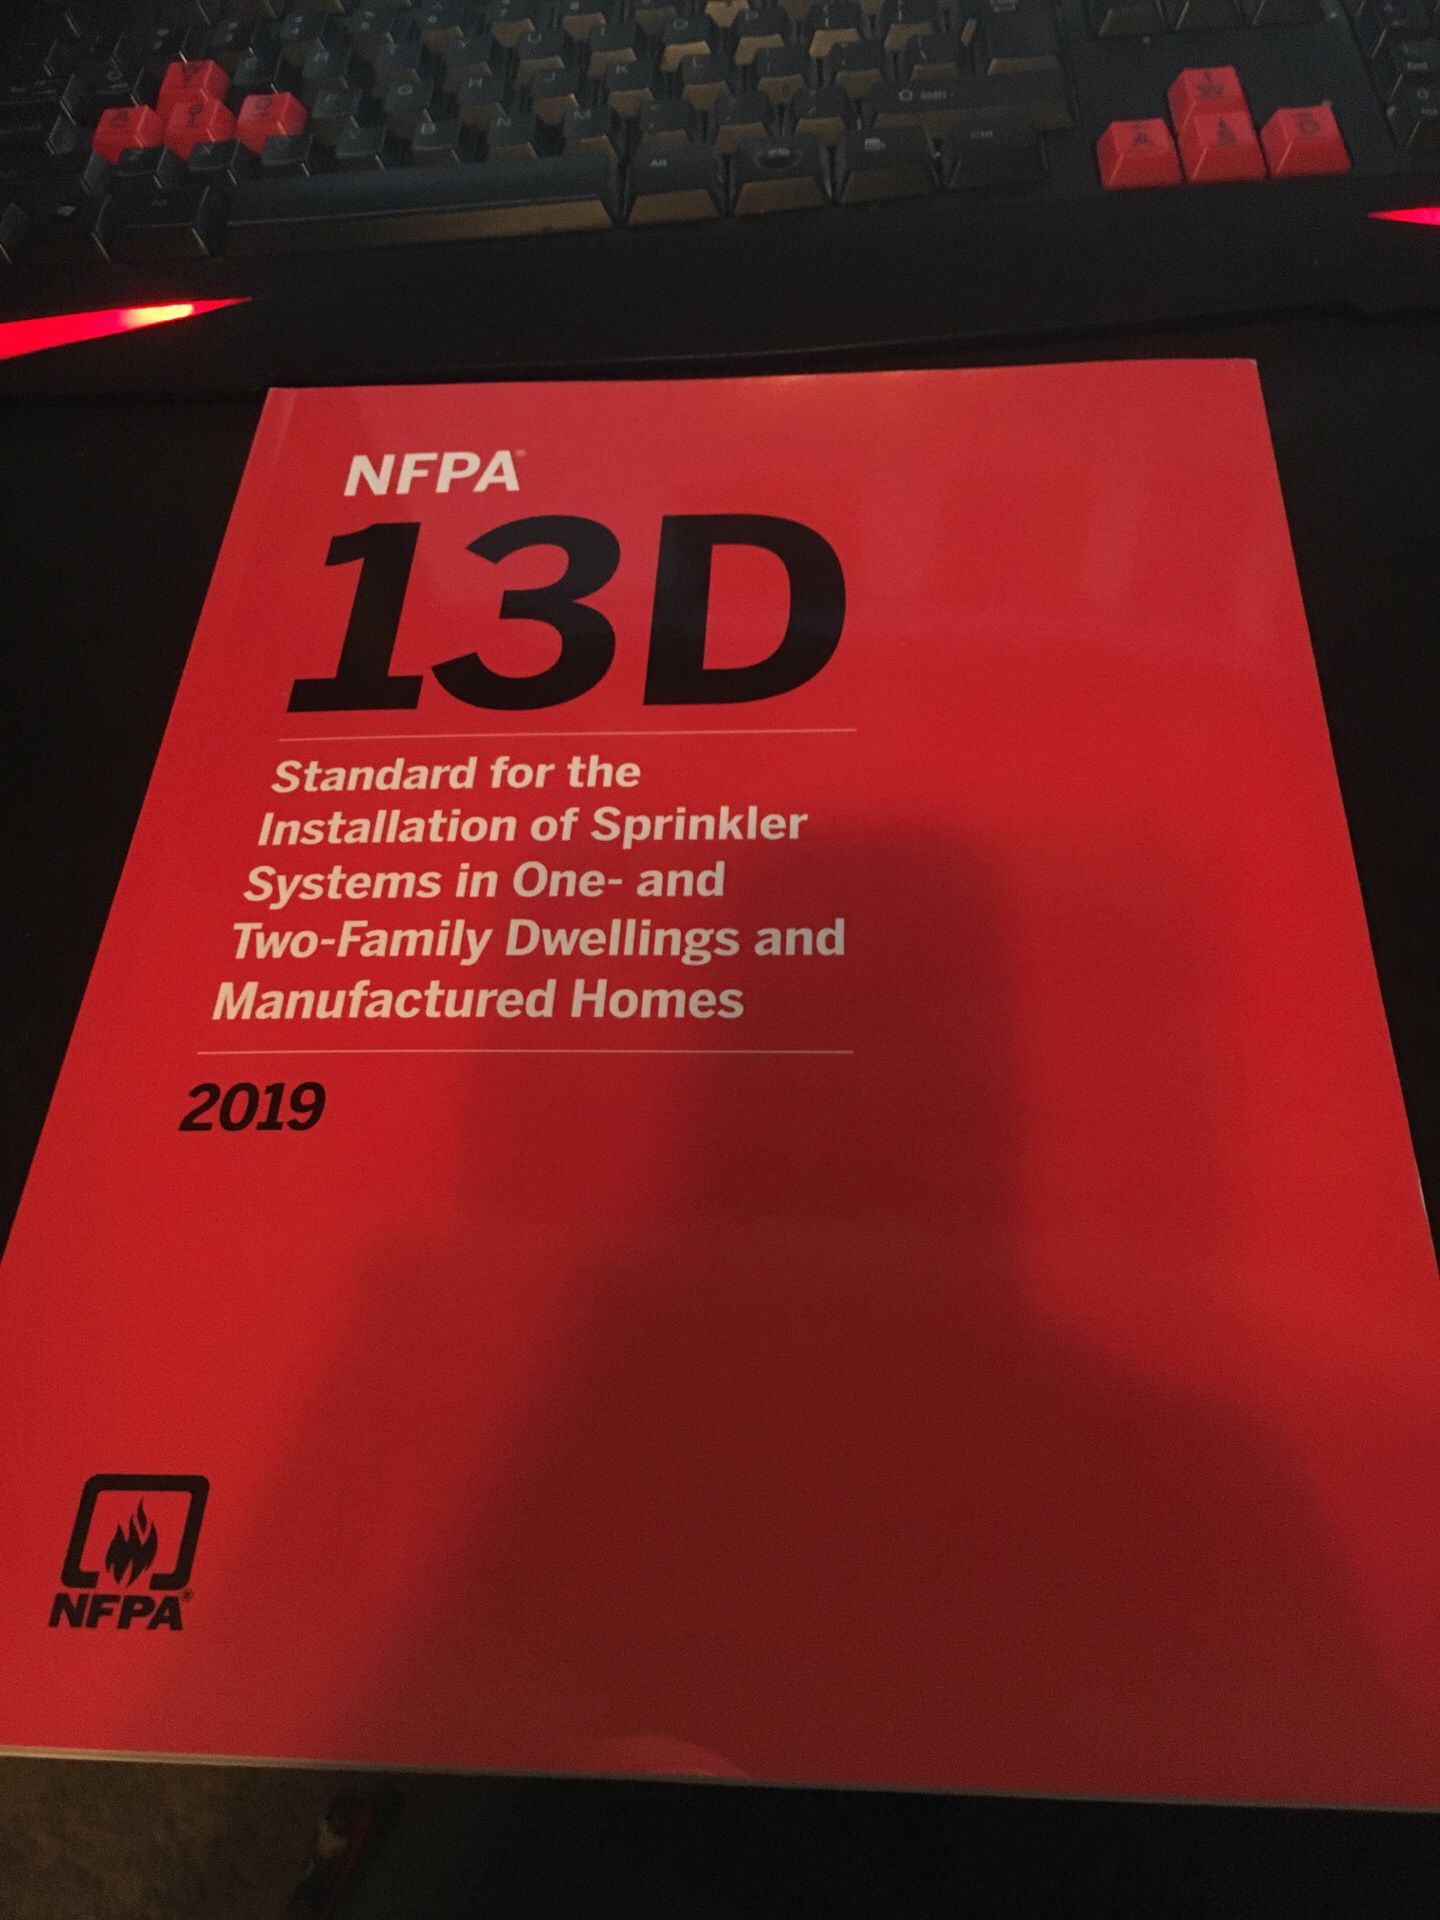 NFPA 13D Standard for the installation of sprinkler systems in one and two family dwellings and manufactured homes